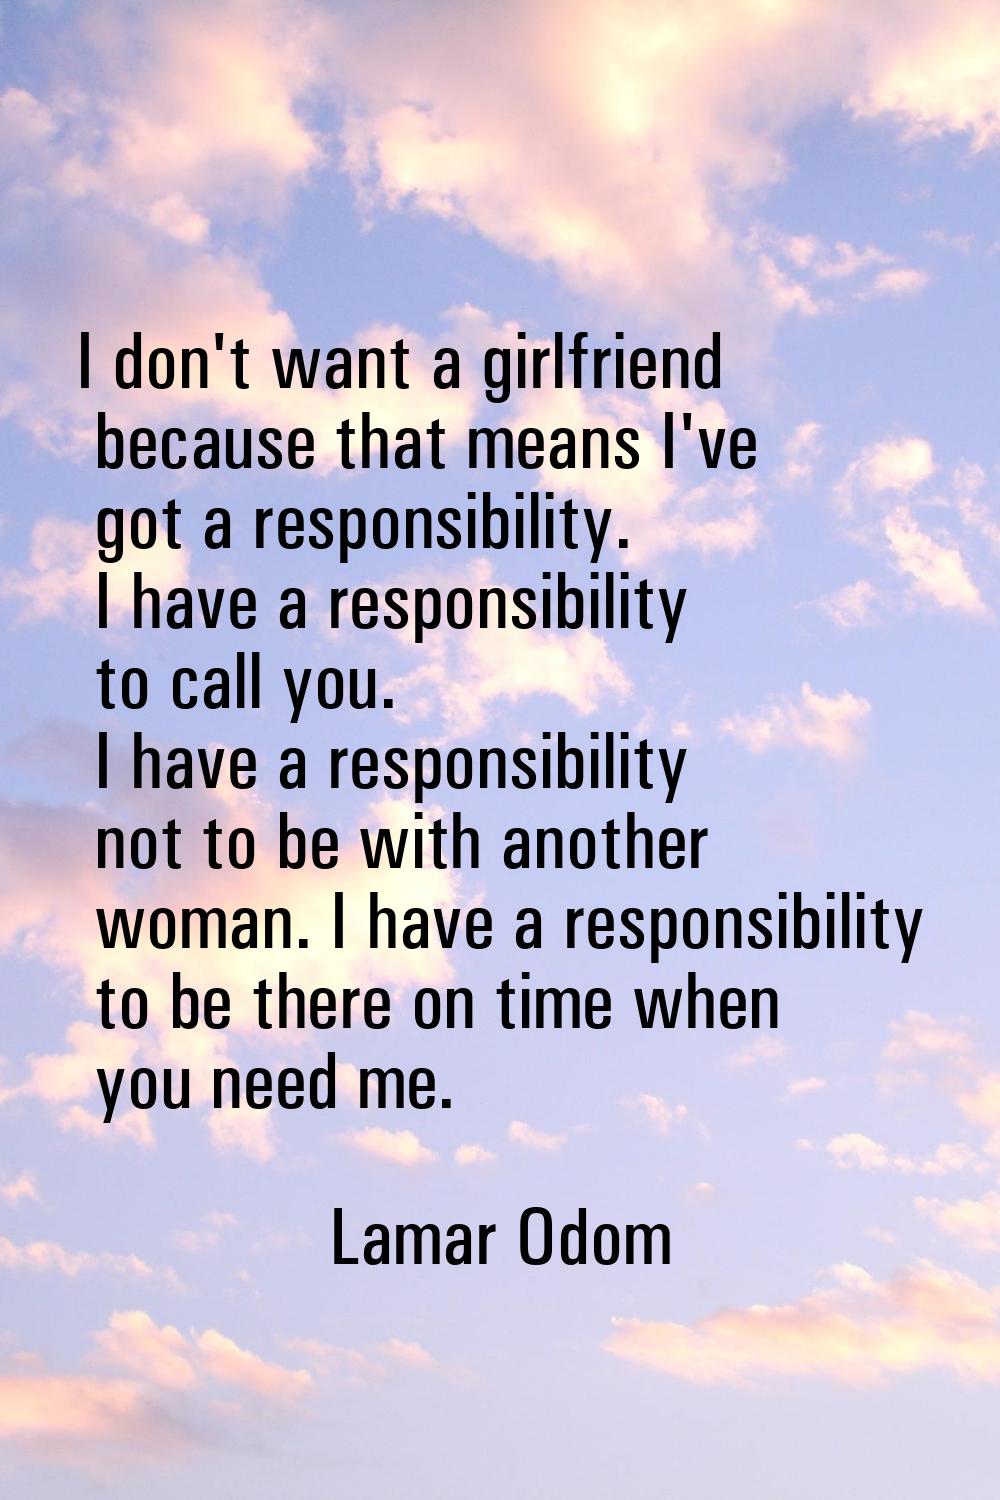 I don't want a girlfriend because that means I've got a responsibility. I have a responsibility to 